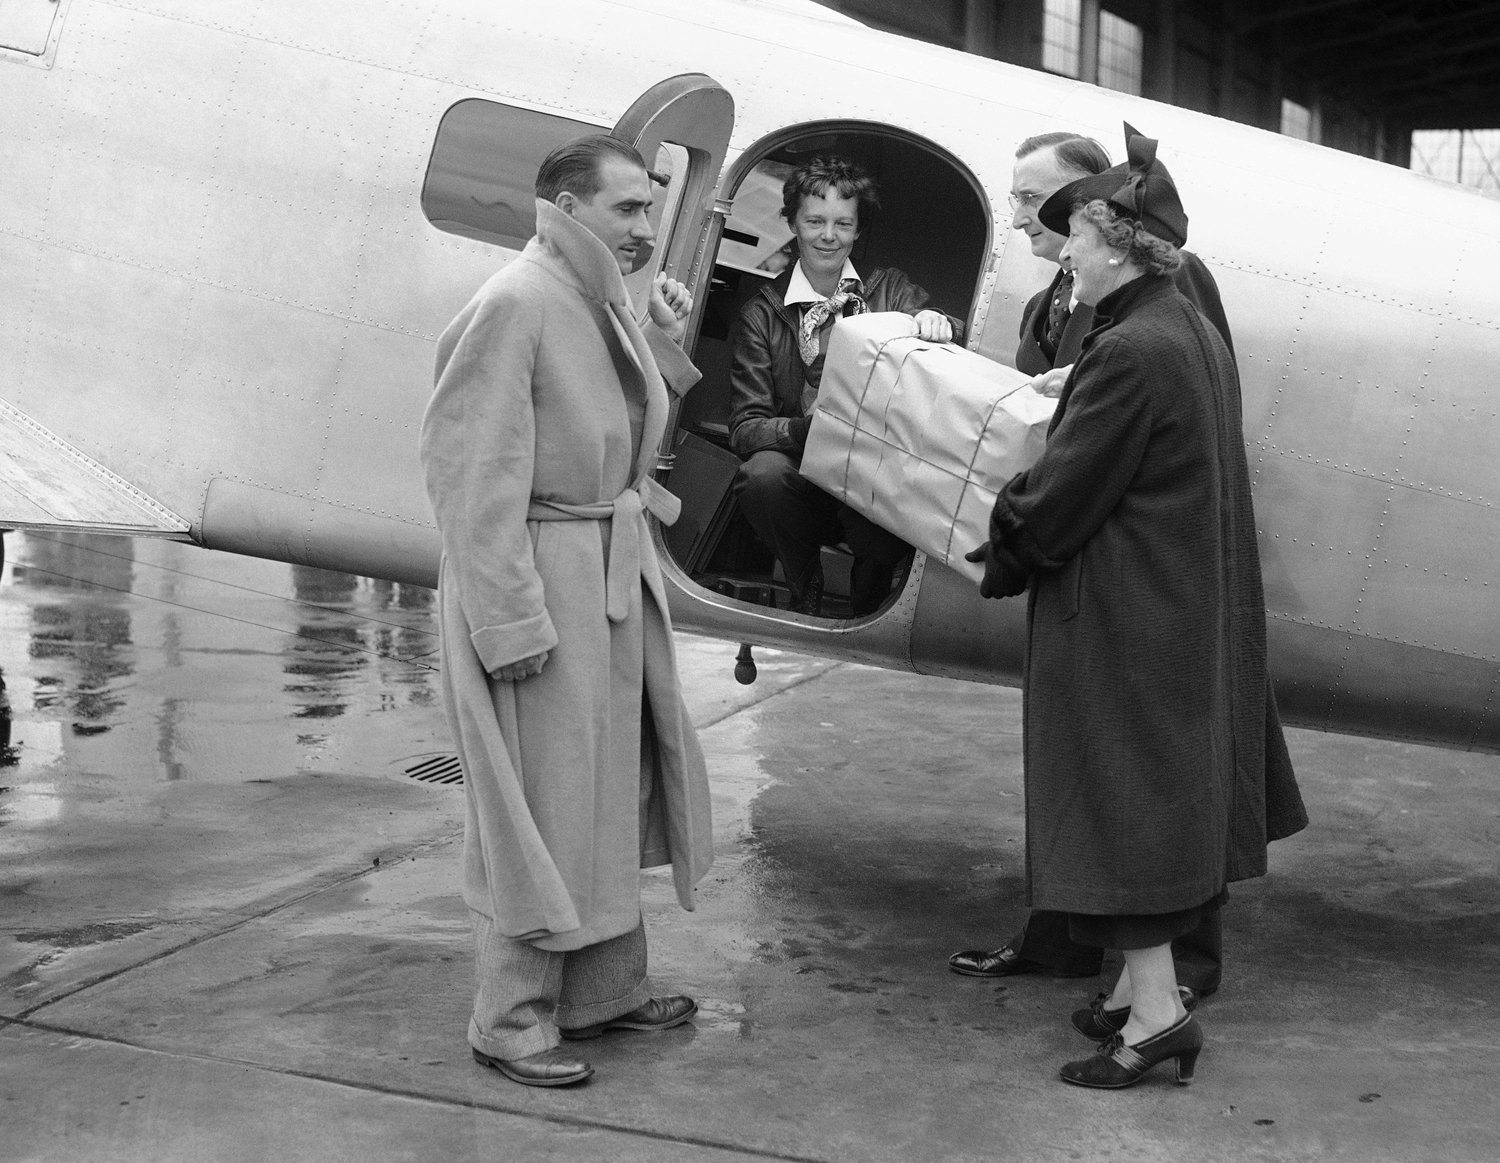  Receiving a box to place aboard her airplane shortly before she took off for Honolulu is Amelia Earhart, Mach 18, 1937, Oakland., Calif. Honolulu was the first stop on her round-the world flight. Left is Paul Mantz, co-pilot as far as Honolulu. Post